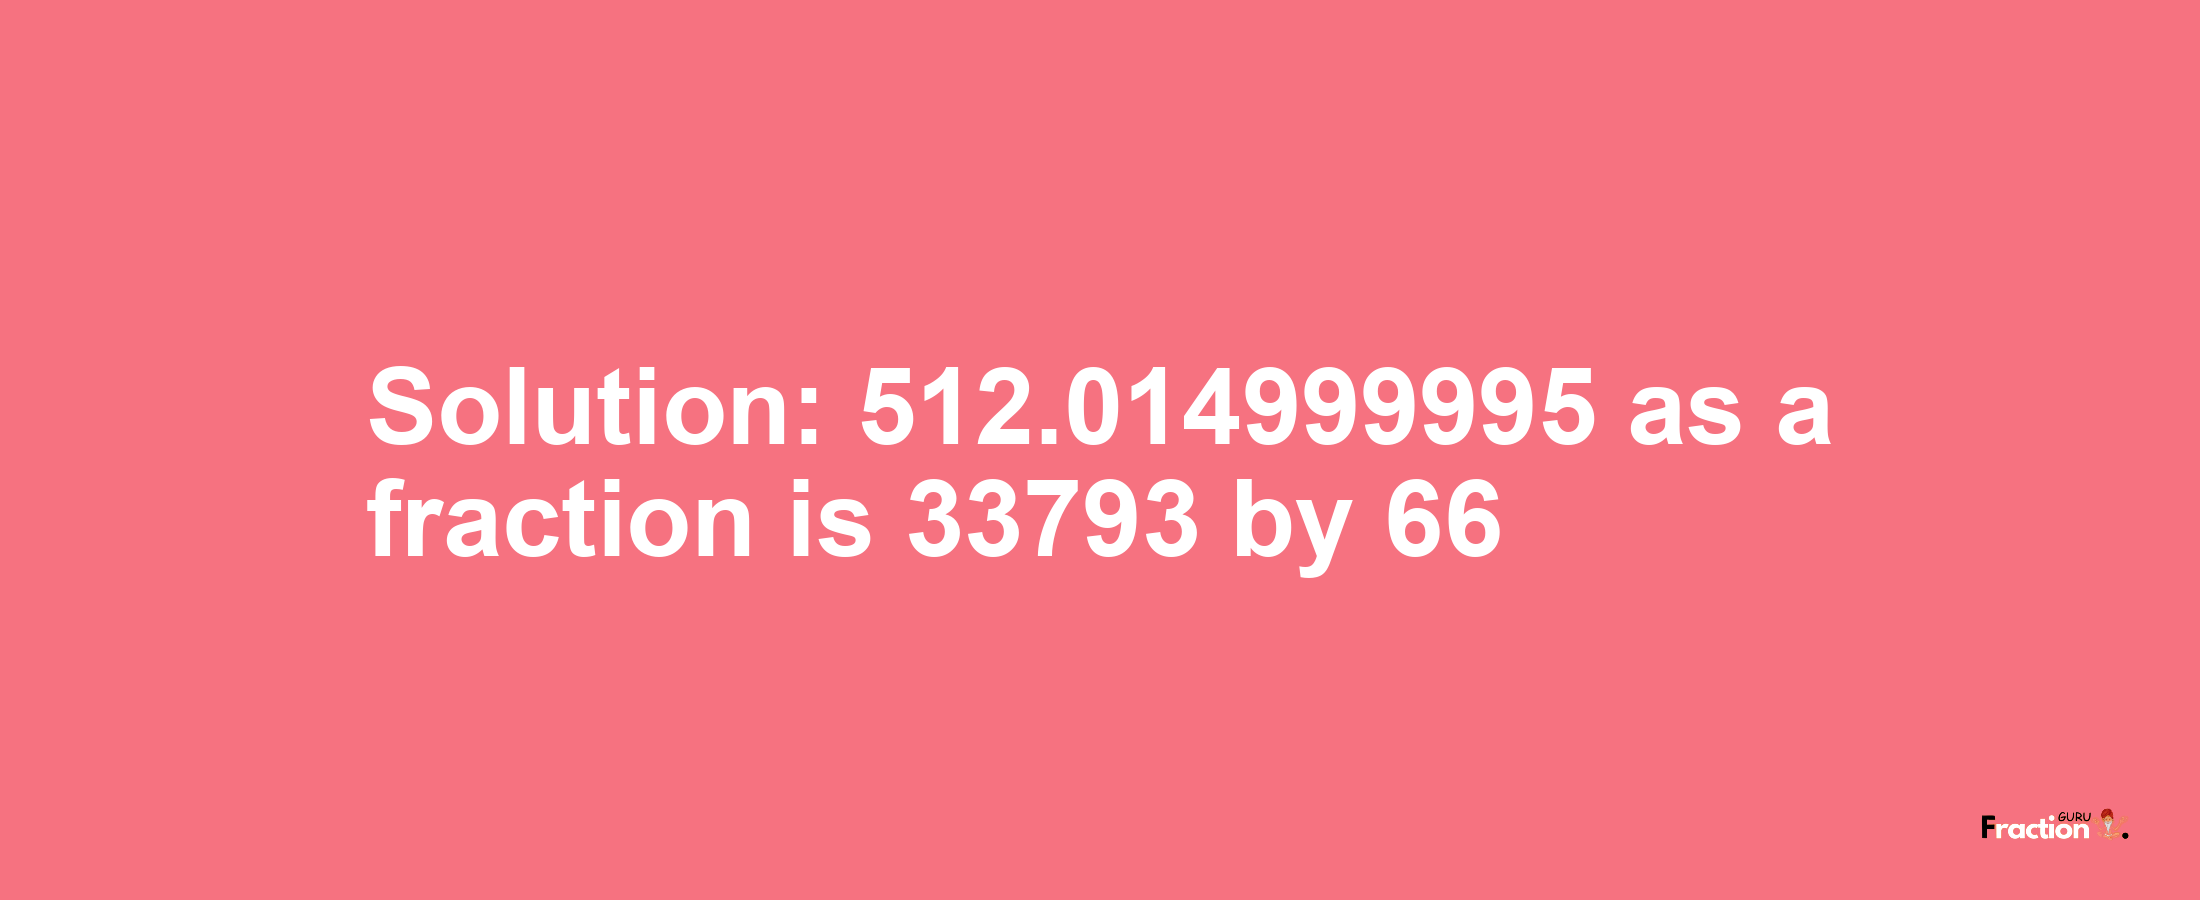 Solution:512.014999995 as a fraction is 33793/66